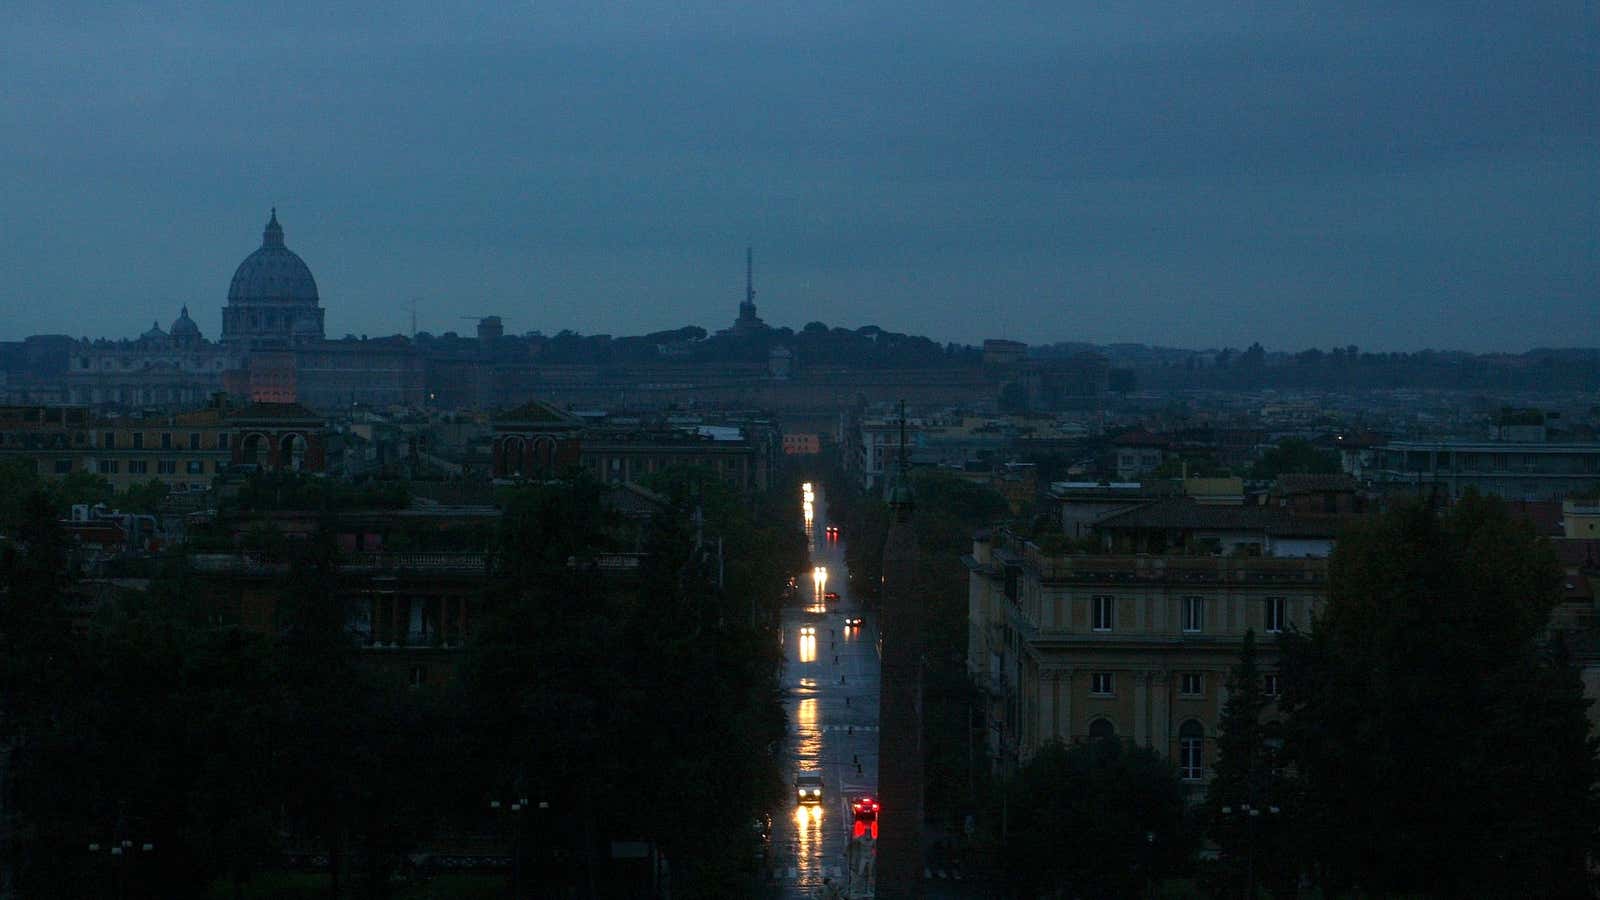 The Rome skyline is seen at sunrise during a power outage September 28,
2003. A power cut hit a large part of Italy in the early hours of Sunday
morning. The national grid authority said the blackout was caused by a
malfunction of incoming electricity lines from abroad. Pictures of the Year
2003    Pictures of the month September 2003     NO RIGHTS CLEARANCES OR PERMISSIONS ARE REQUIRED FOR THIS IMAGE
REUTERS/Alessia Pierdomenico
AMP – RP4DRIFRYOAE